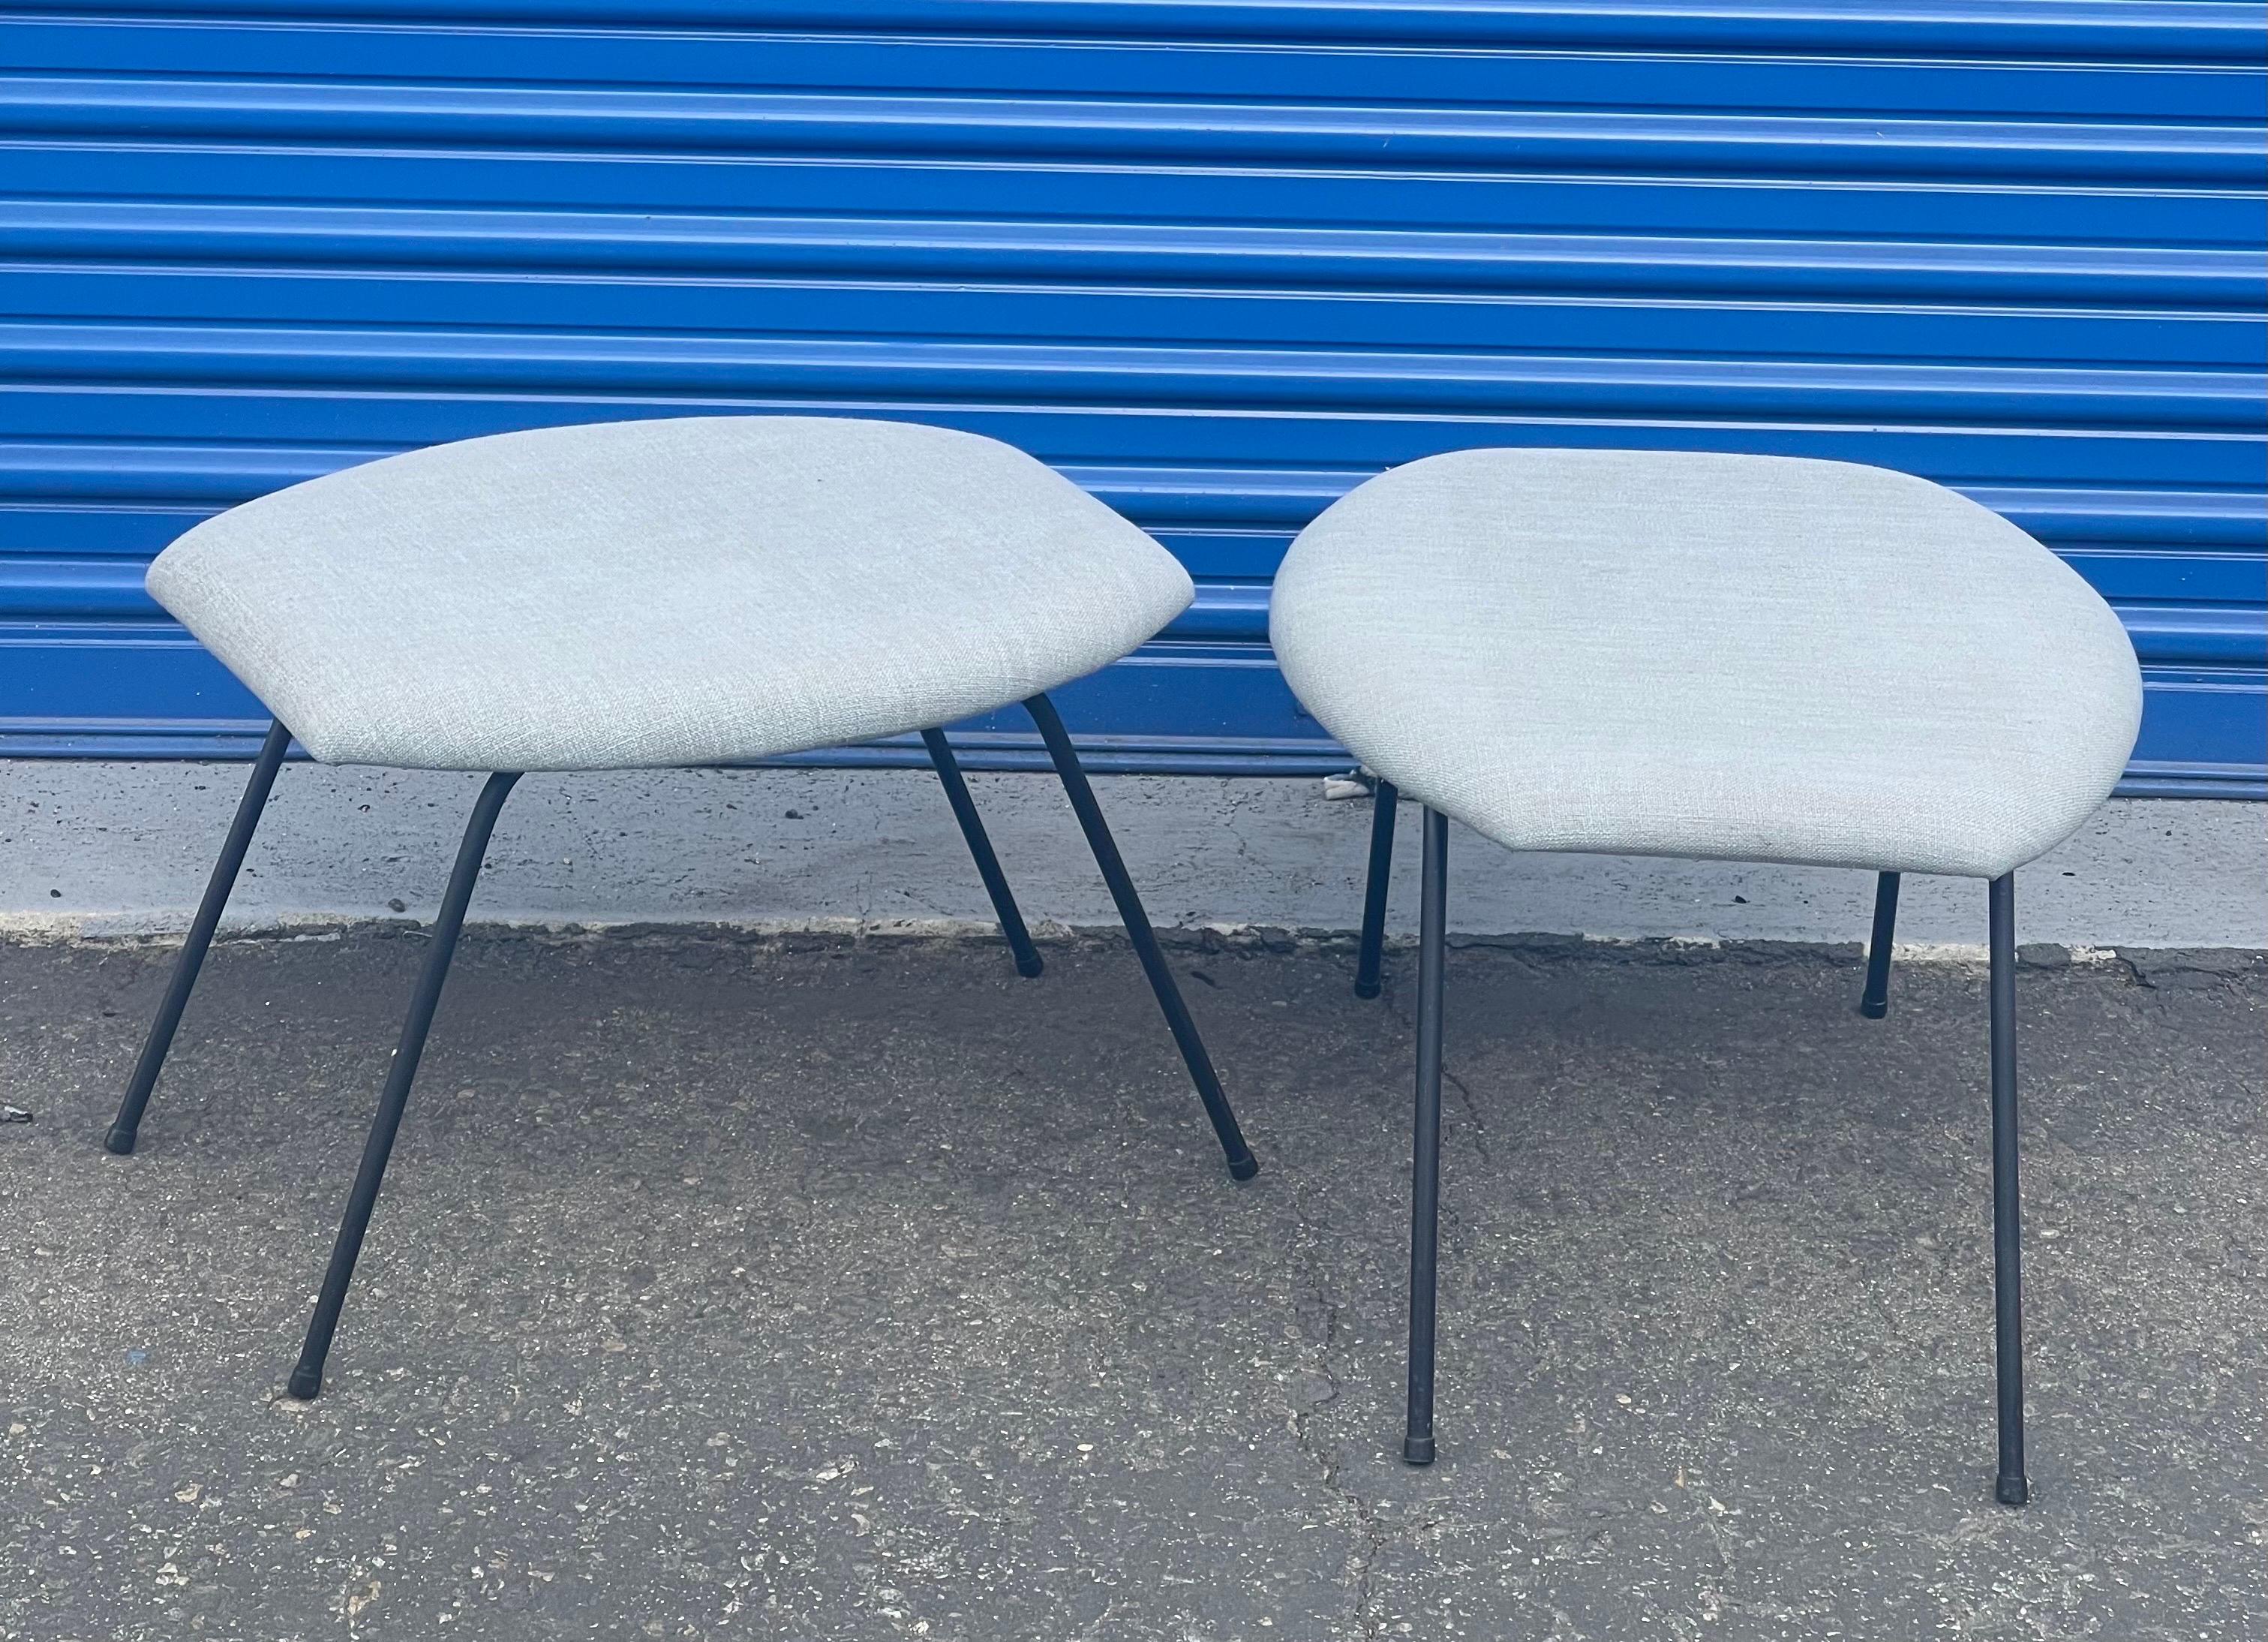 Pair of Atomic Age Iron Base Ottomans by Joseph Cicchelli, California Design In Good Condition For Sale In San Diego, CA